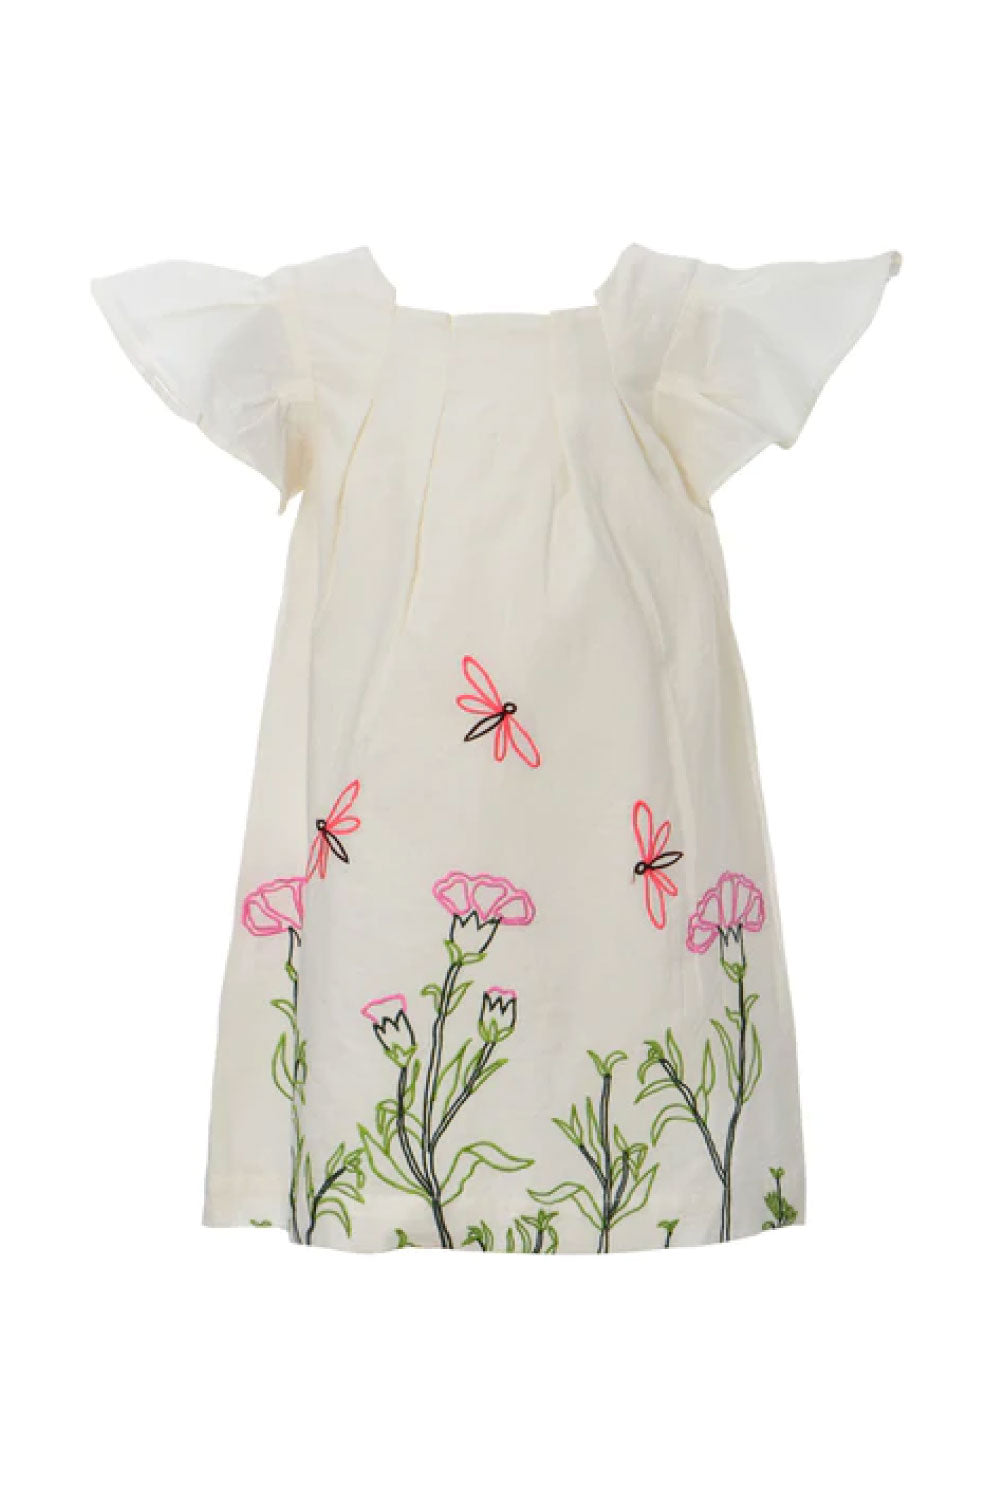 Image of the front of the Alice Embroidery Dress.